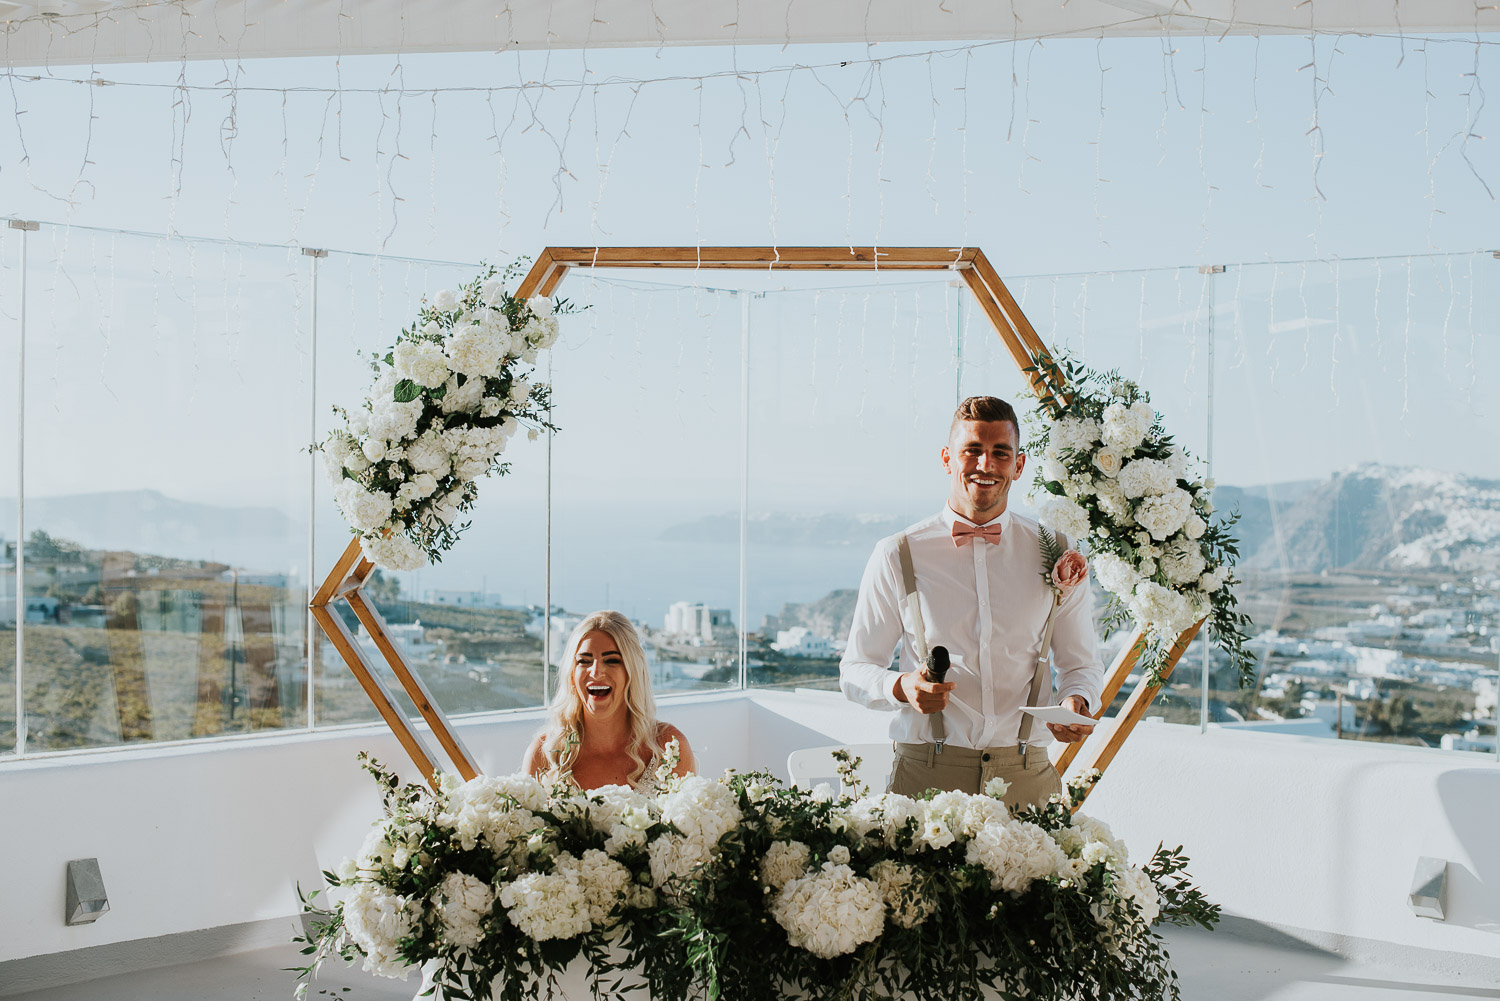 Wedding photographer Santorini: groom and bride in front of the wedding arch basked in the sun as he starts his speech by Ben and Vesna.